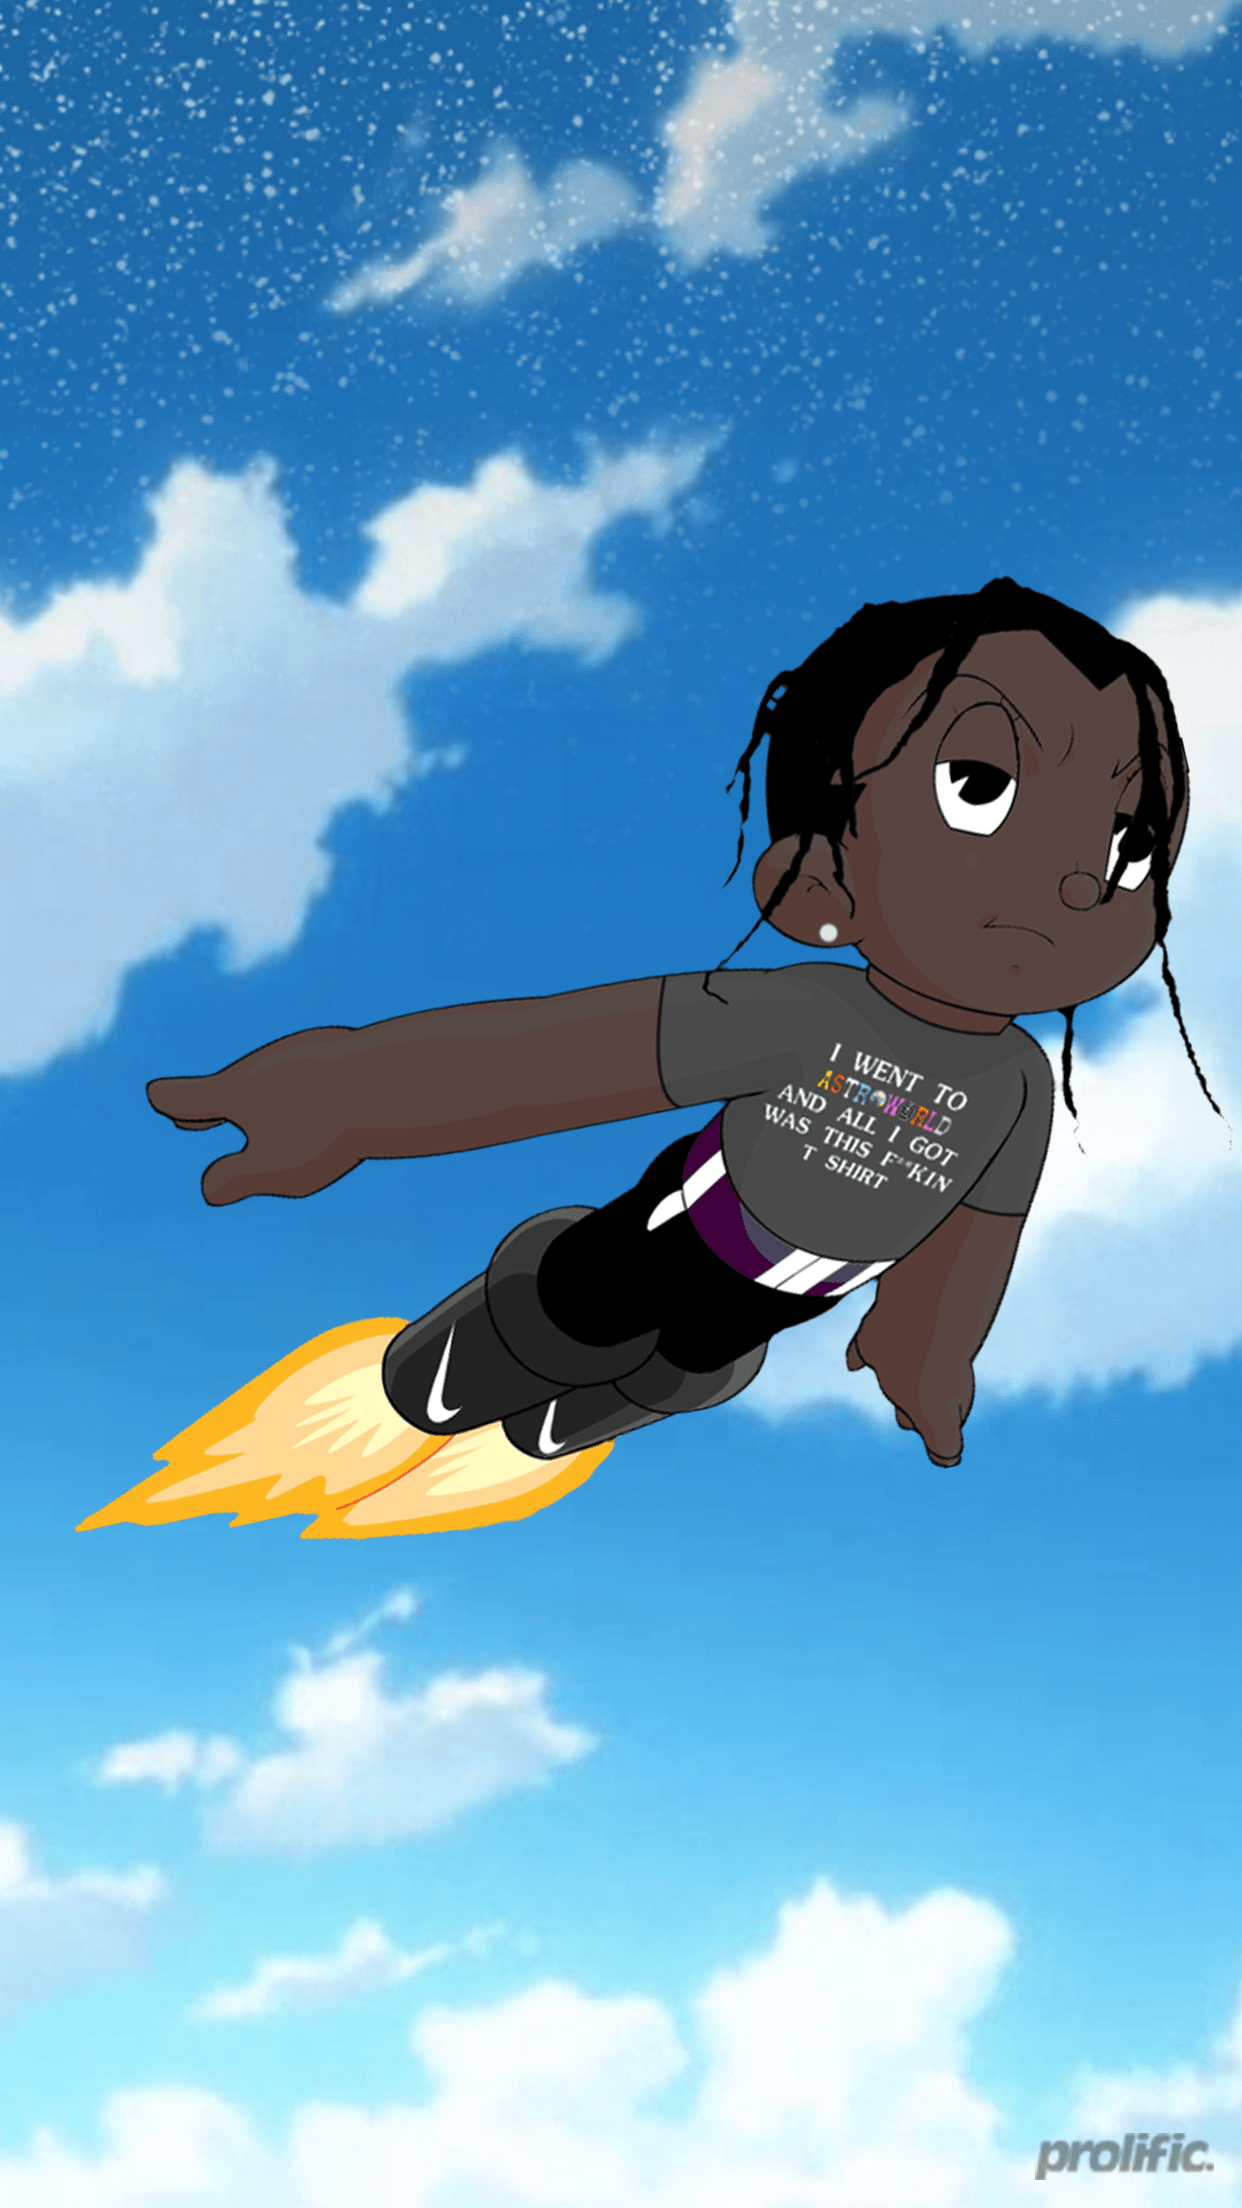 Couple people asked, so here's the Travis Scott X Astro Boy